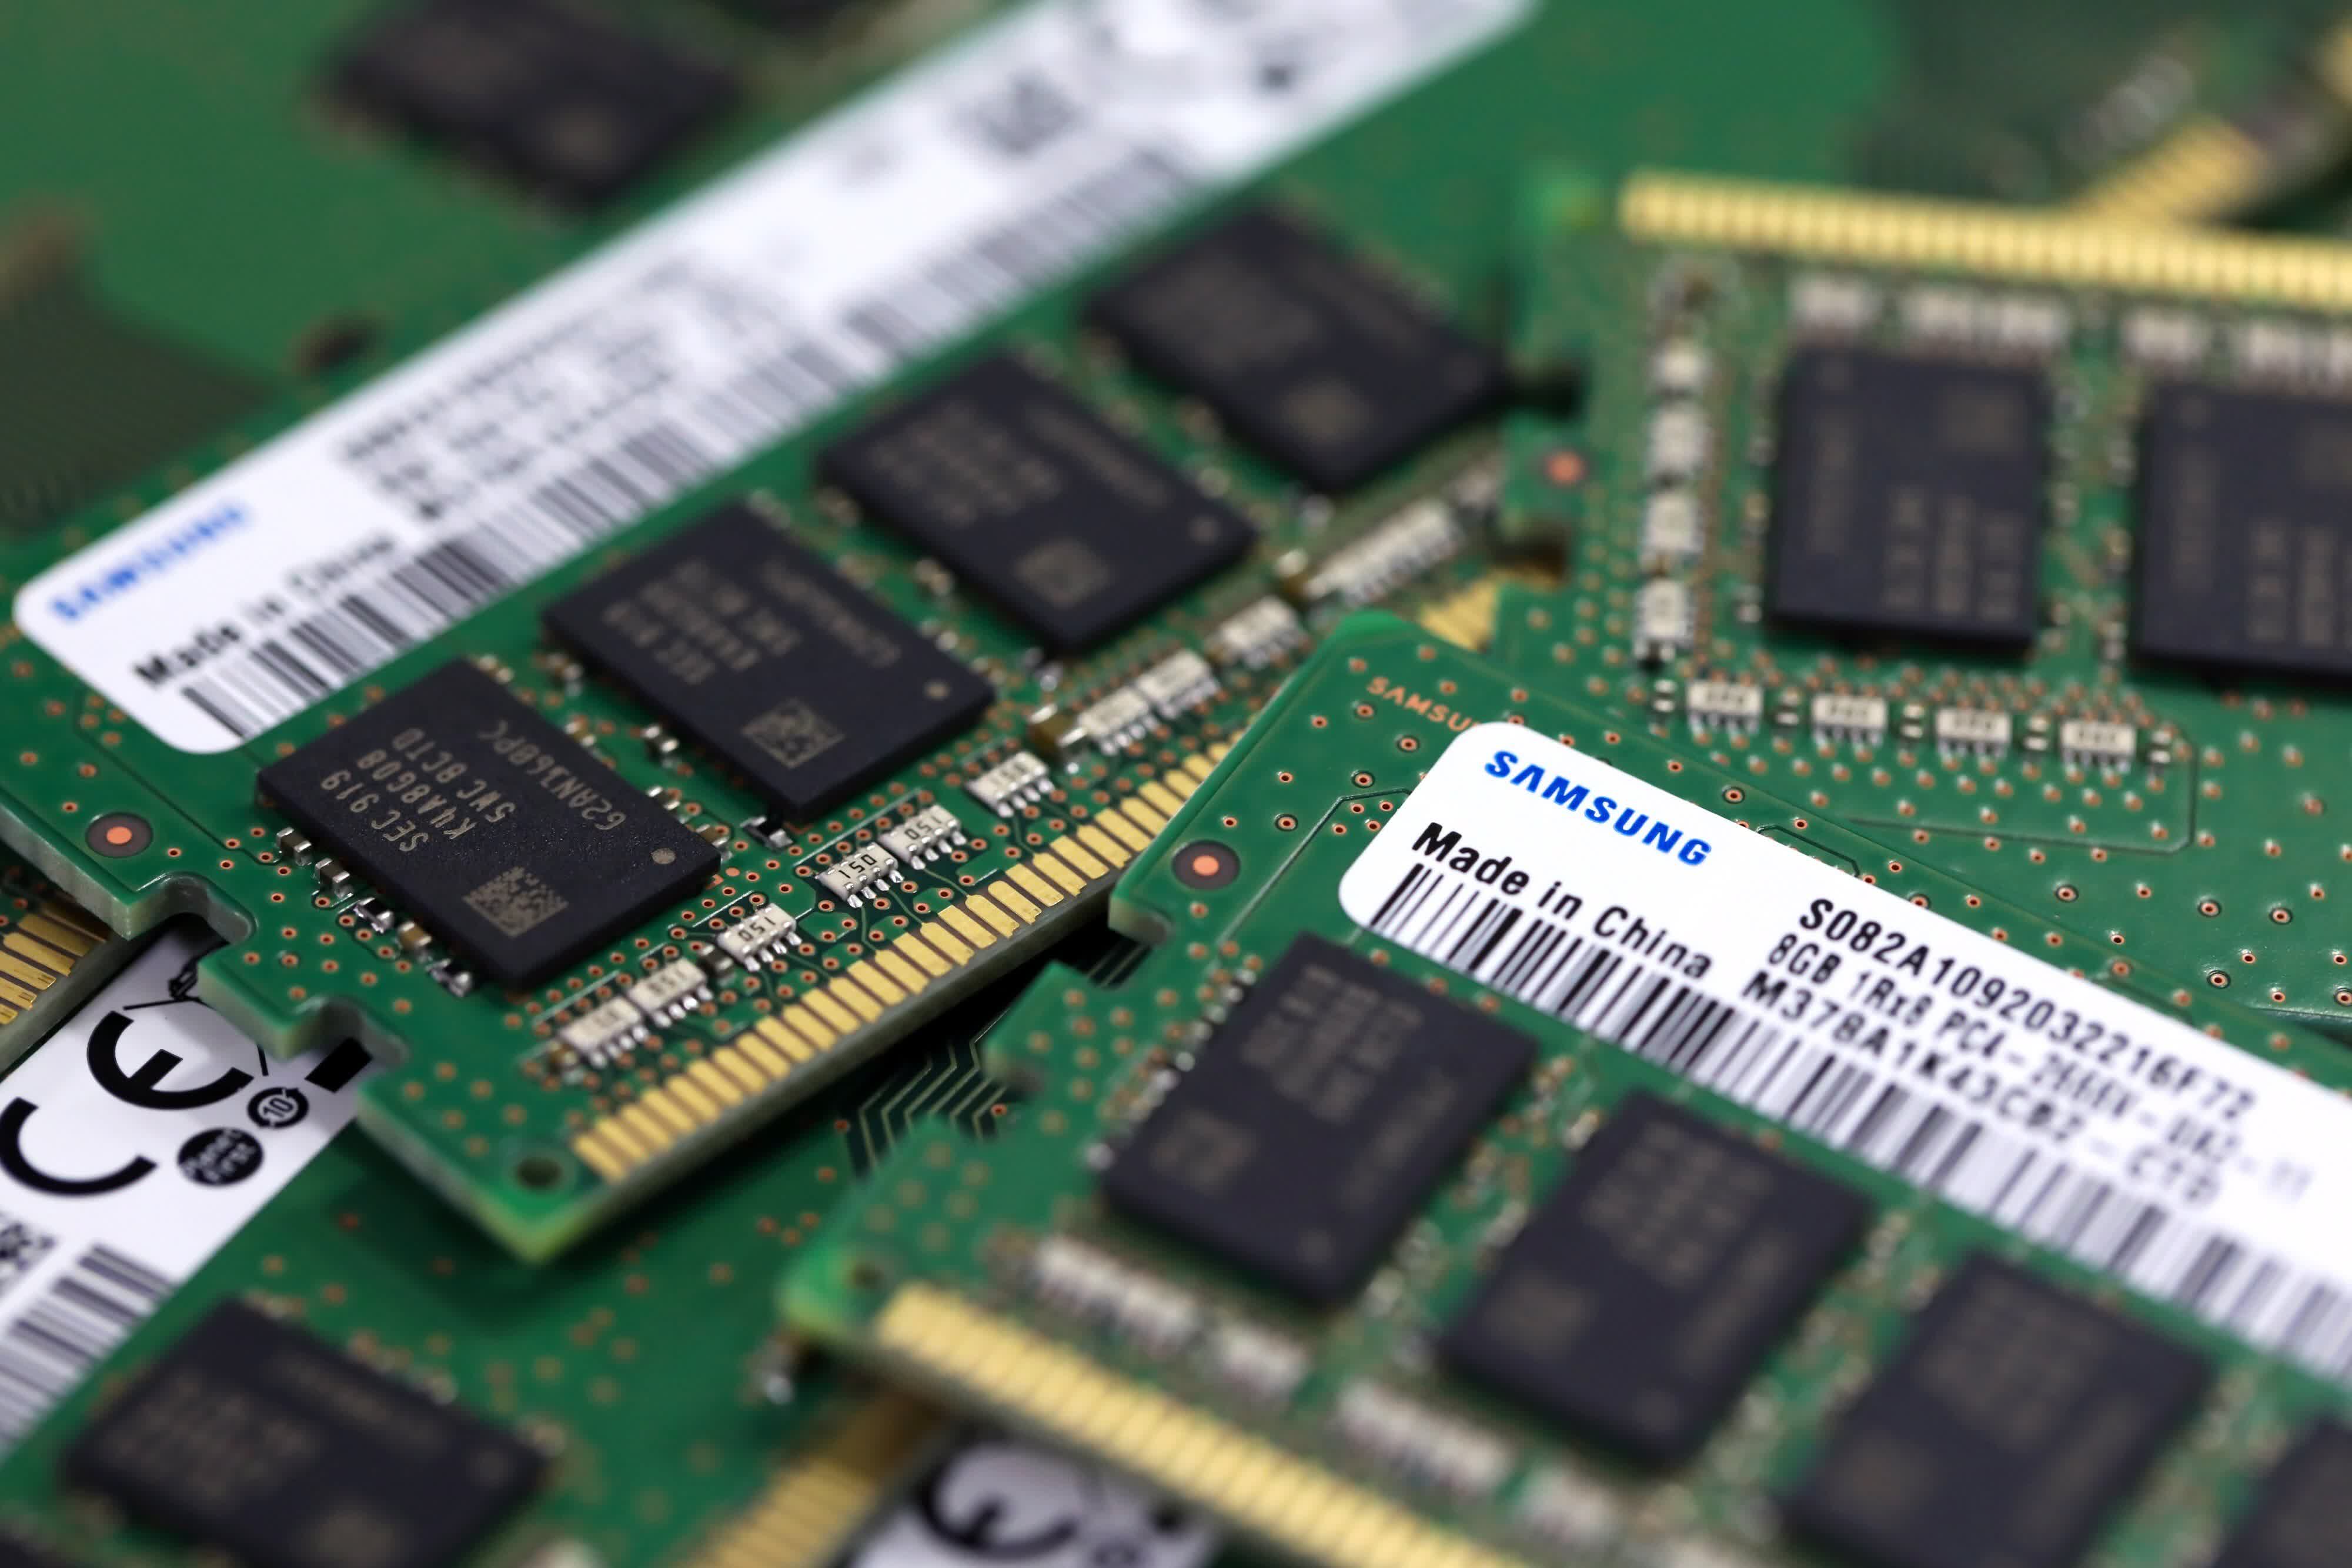 Samsung cutting DDR3 production and DDR4 prices to nudge customers towards newer DRAM tech